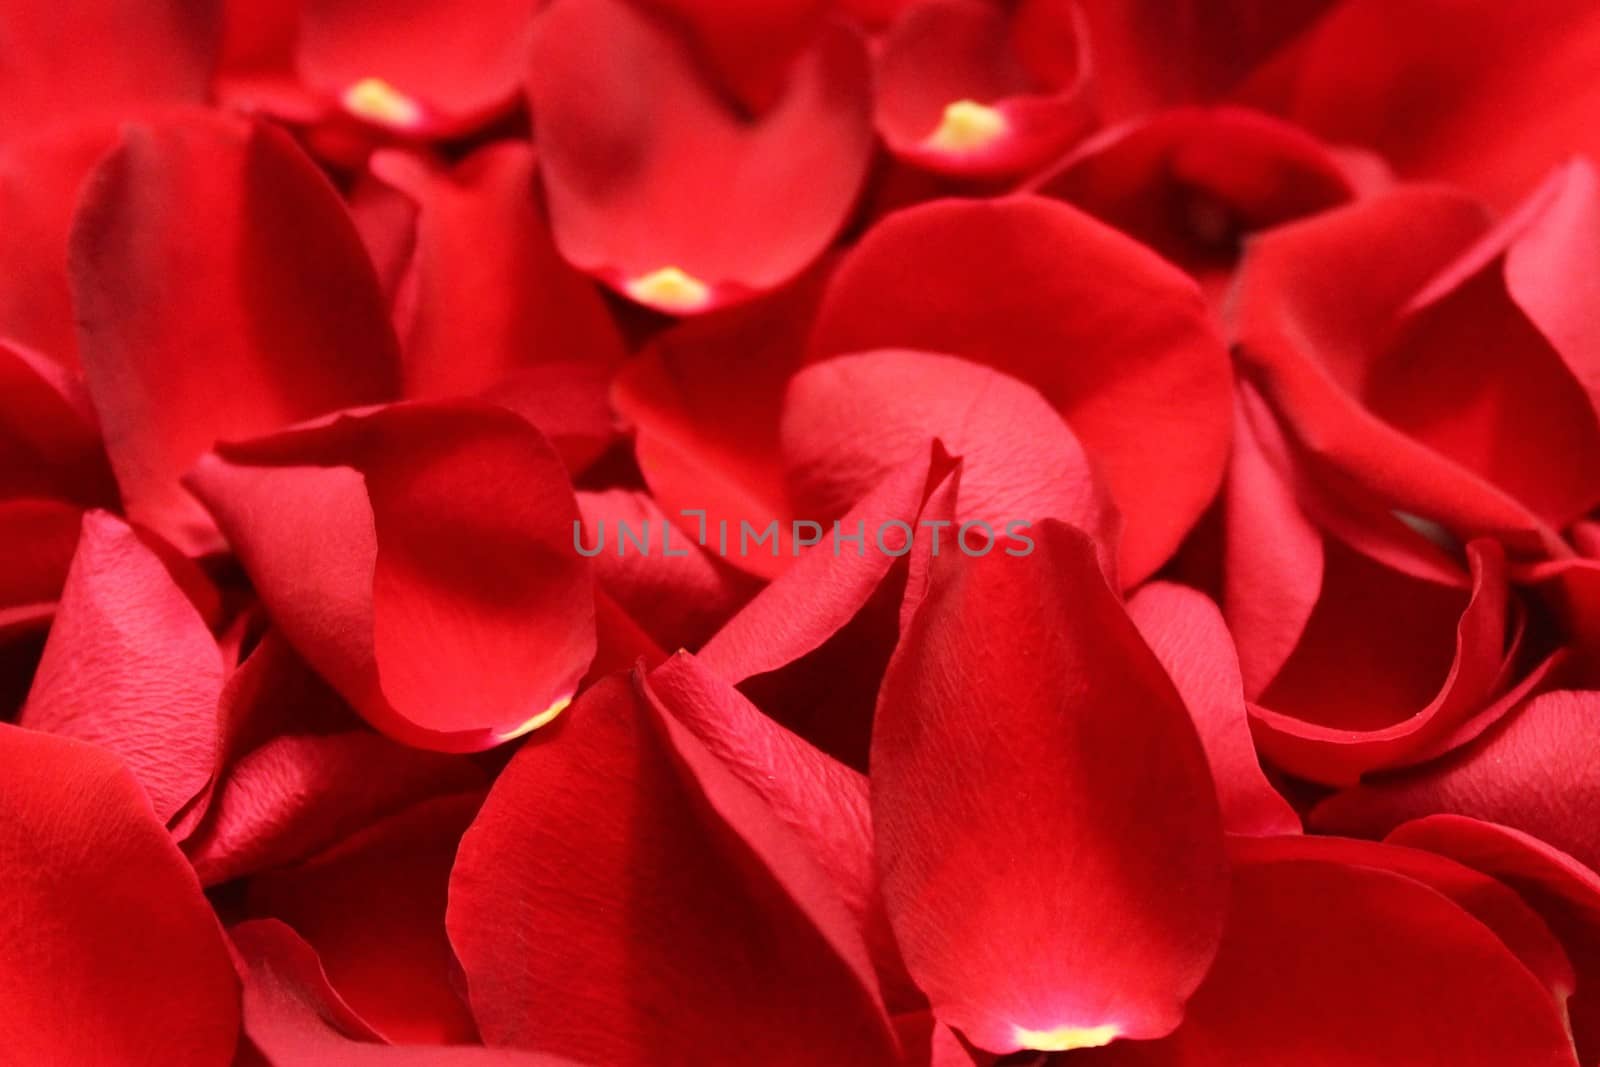 The picture shows a background with red rose petals